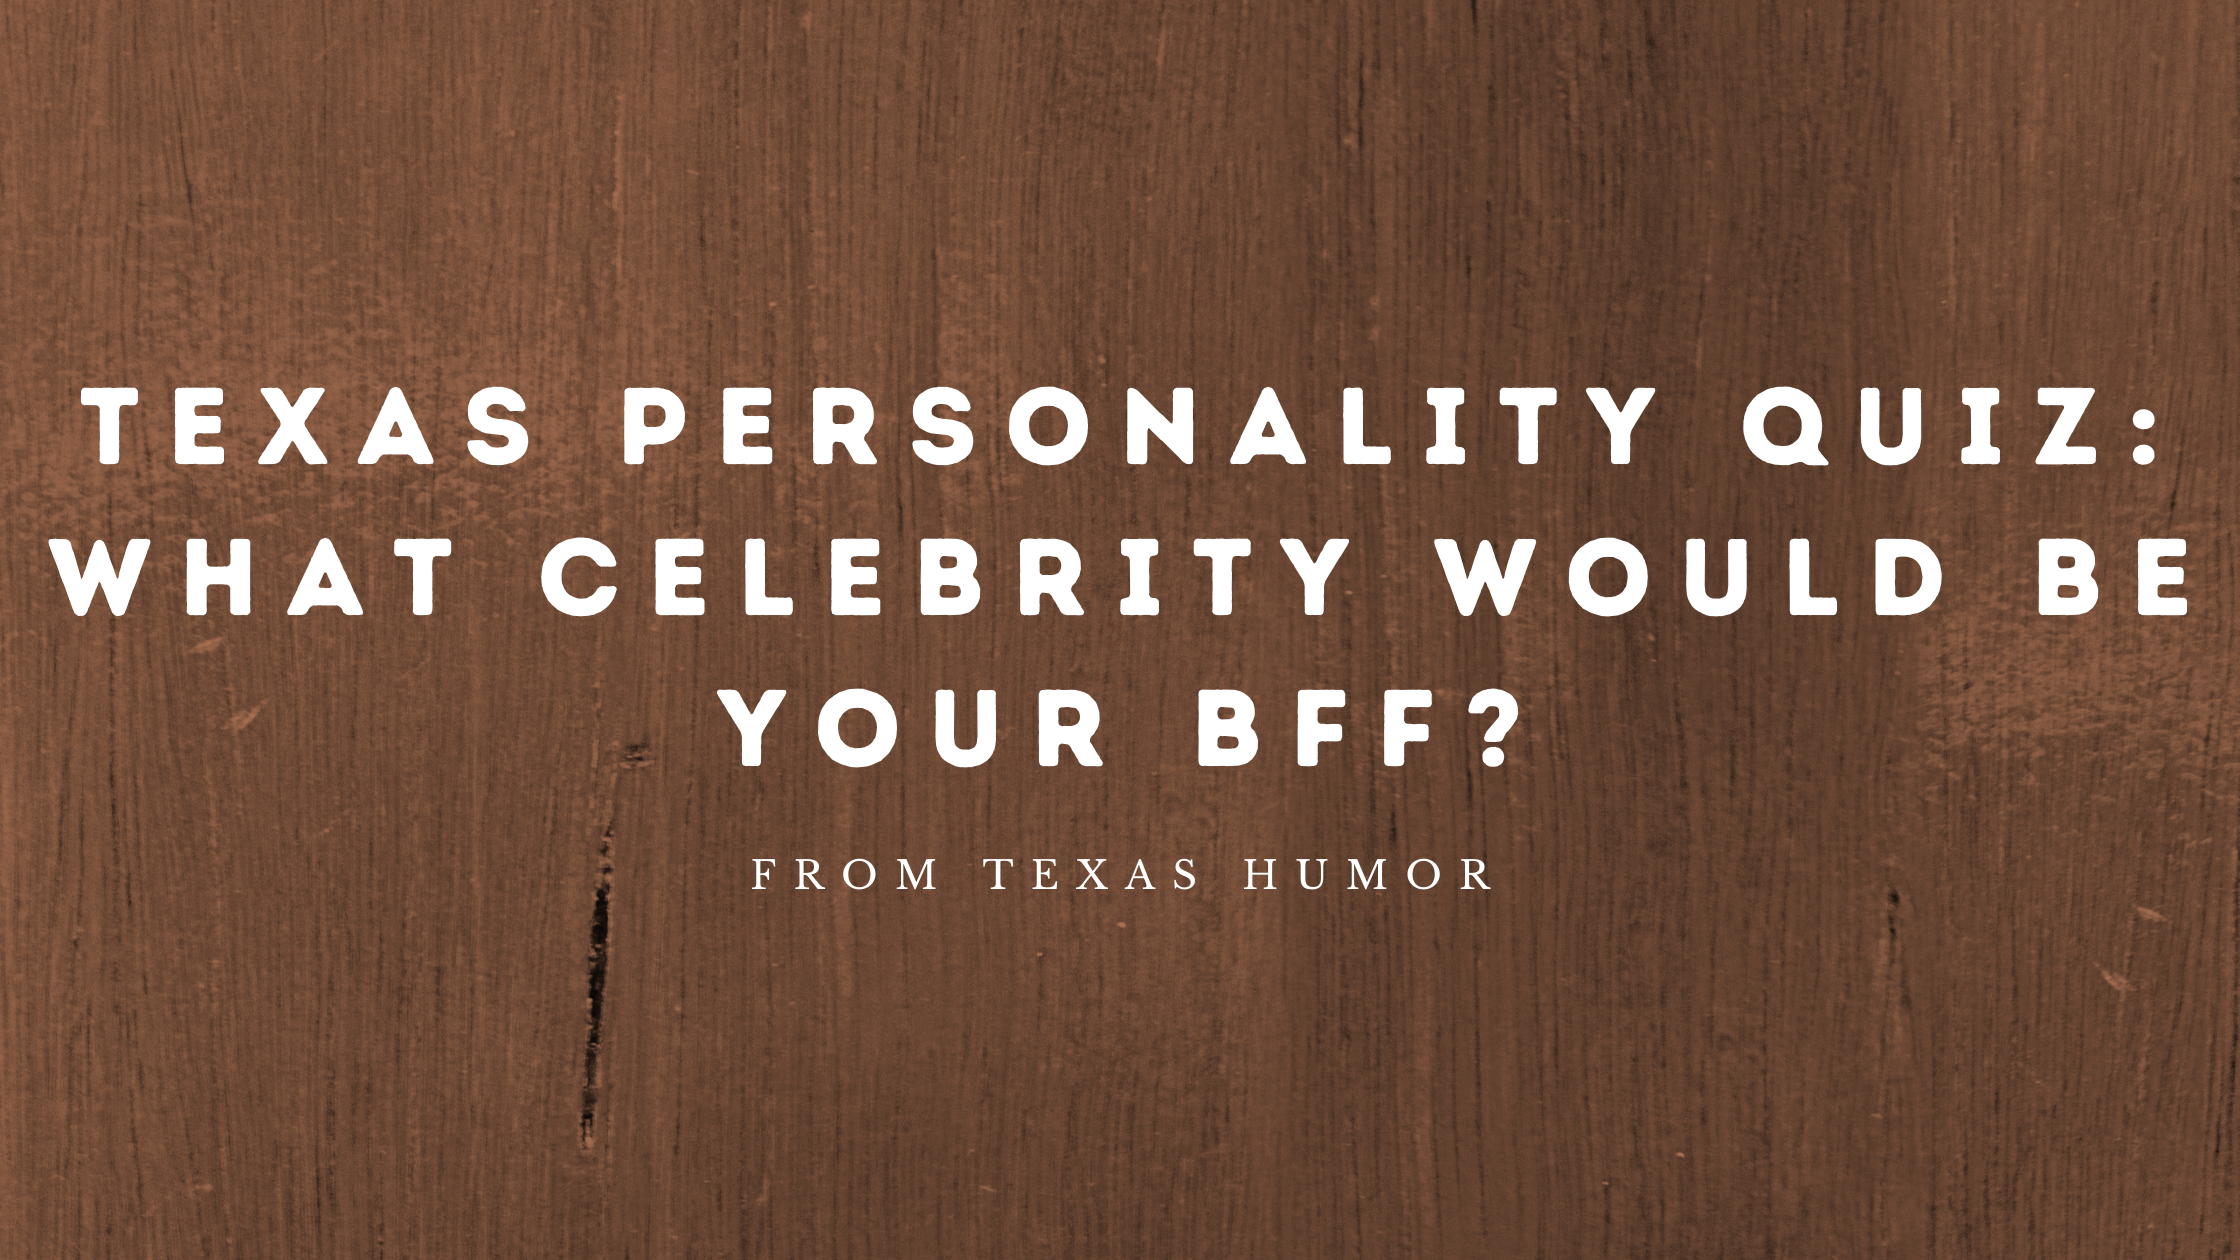 TEXAS PERSONALITY QUIZ: Which Texas Celebrity would be your best friend?